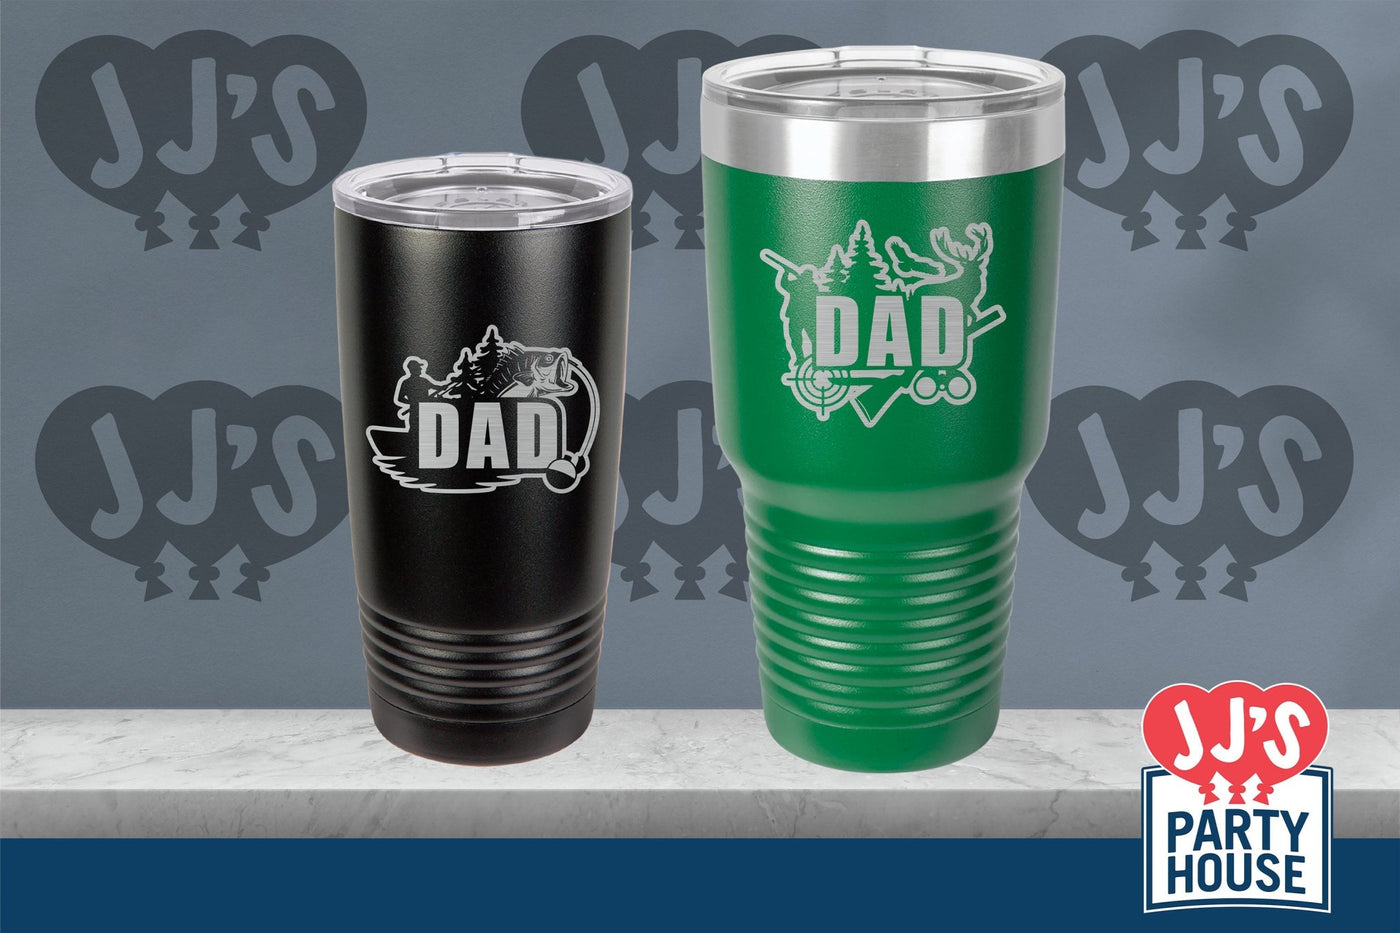 Custom Hunter/Fisherman Polar Tumbler Birthday,Father's Day,Hunting/Fishing Season Set Laser Engraved and Personalized for that Outdoorsman - JJ's Party House